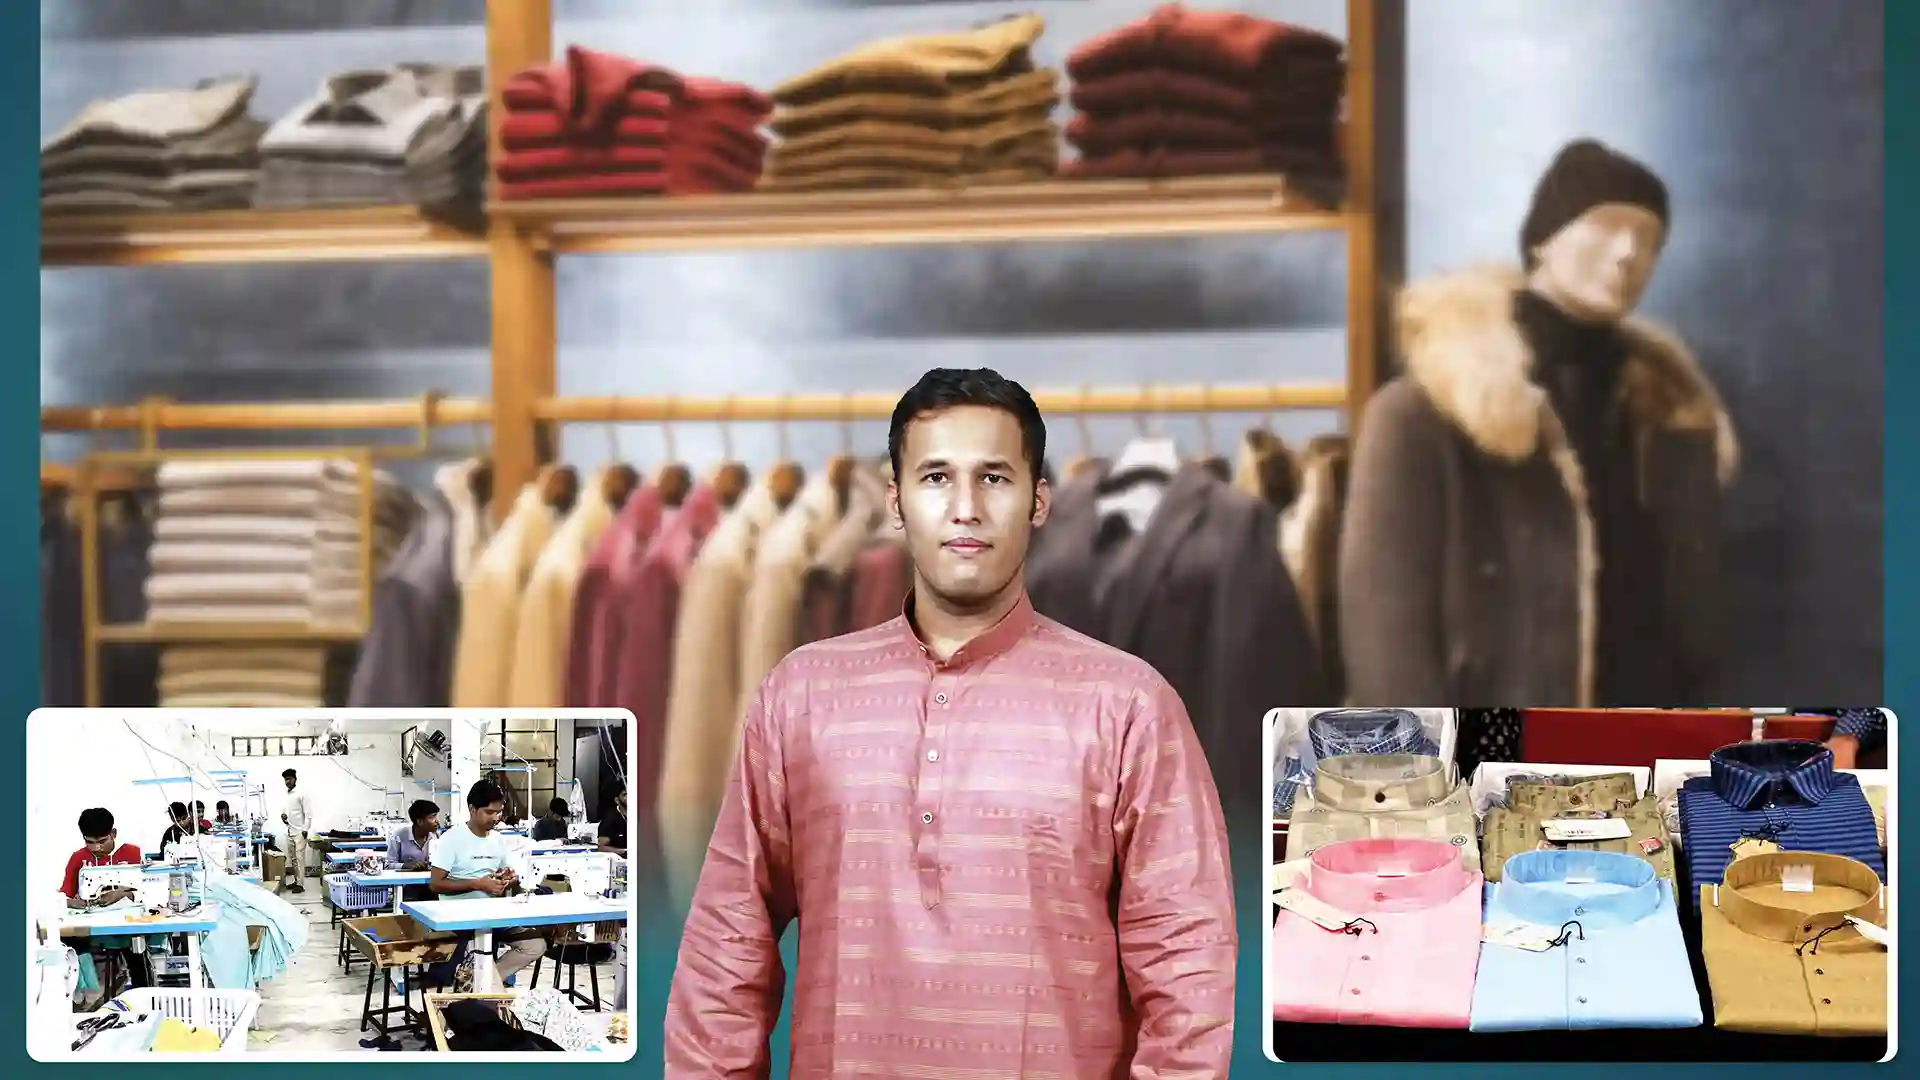 Menswear factory business course video